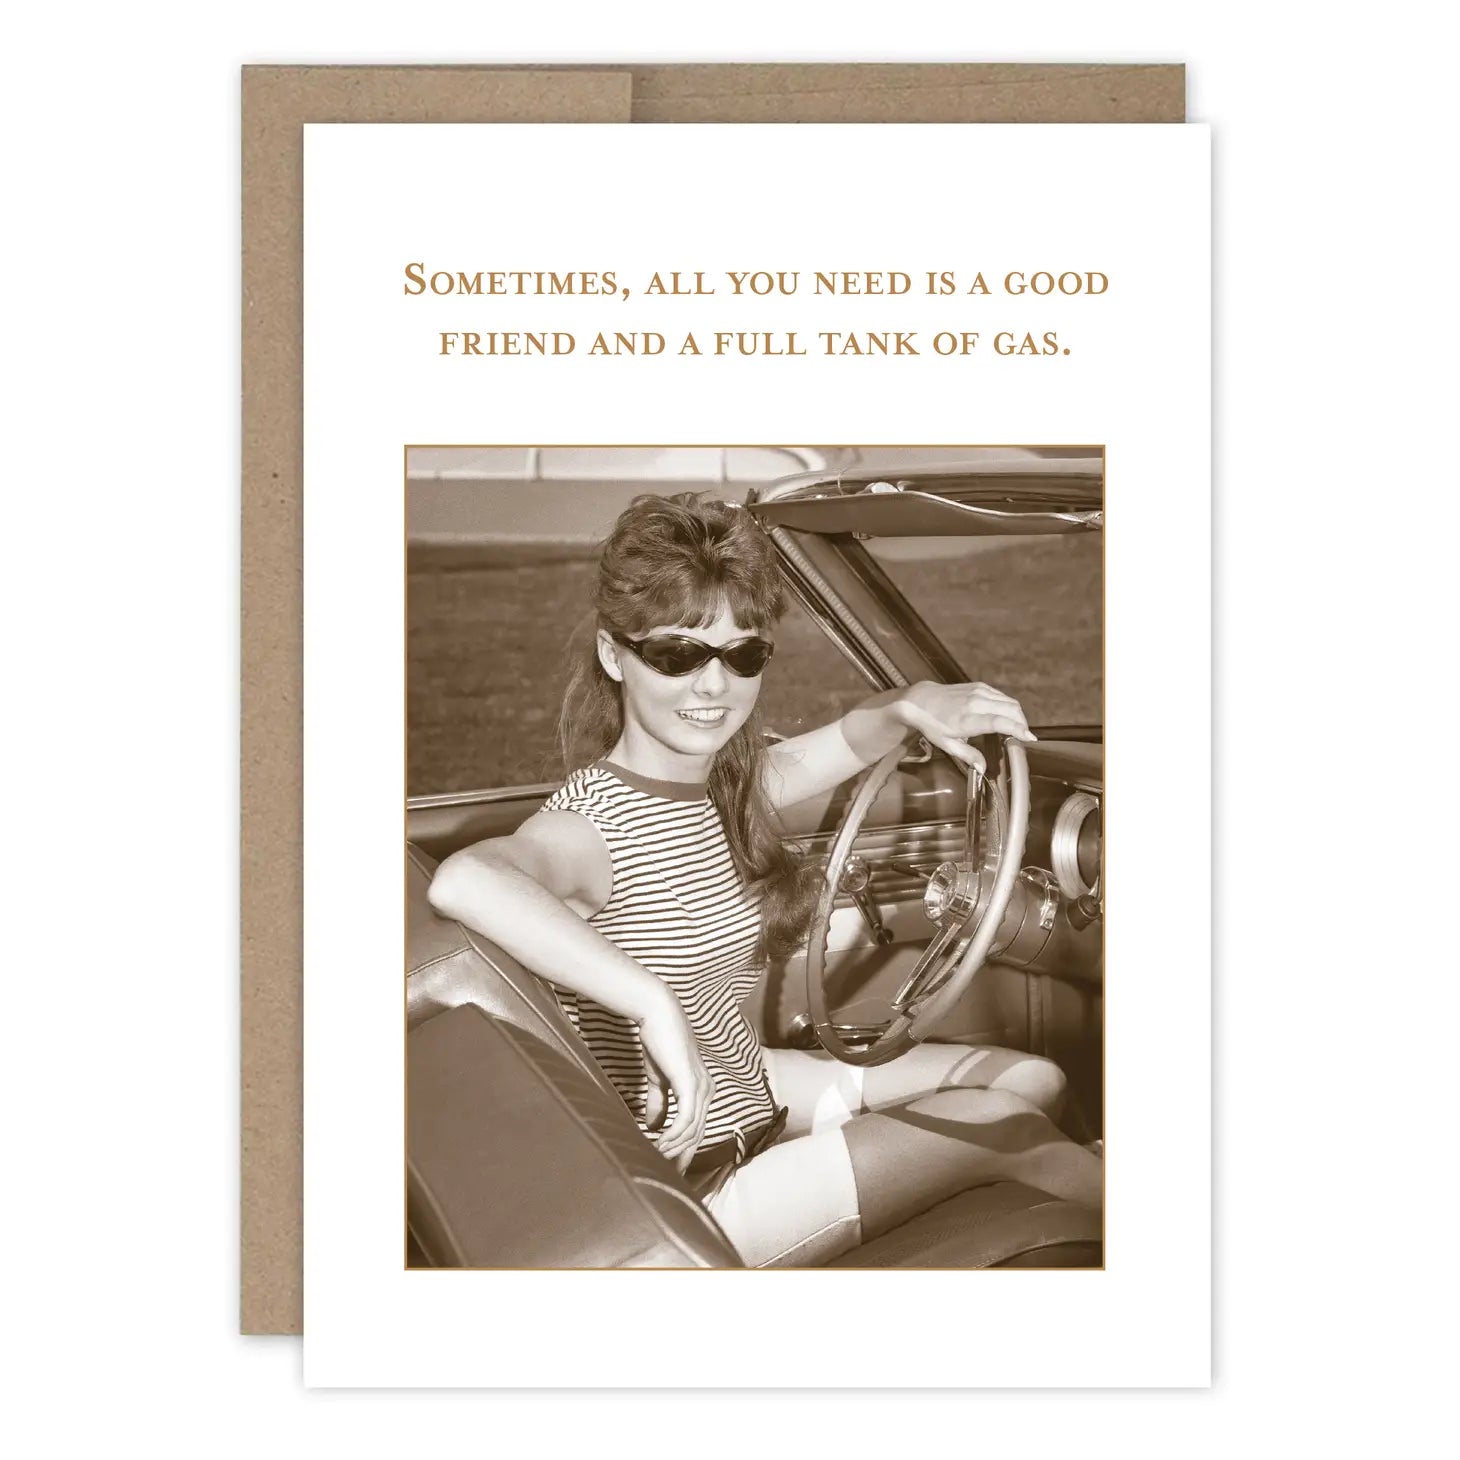 Sometimes all you need is a good friend and a full tank of gas greeting card